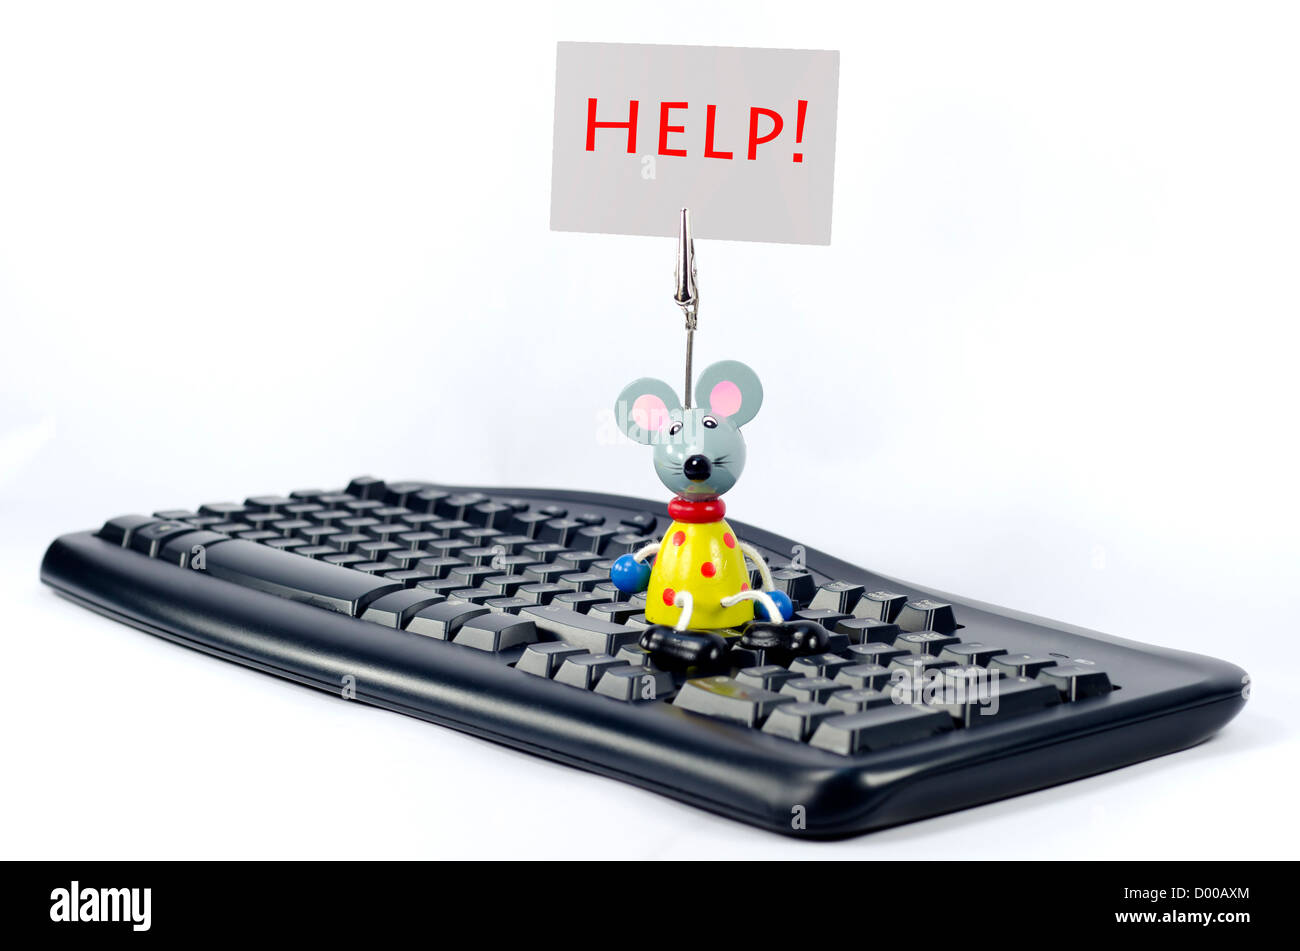 A humourous request for help, perhaps with using a PC mouse? Stock Photo